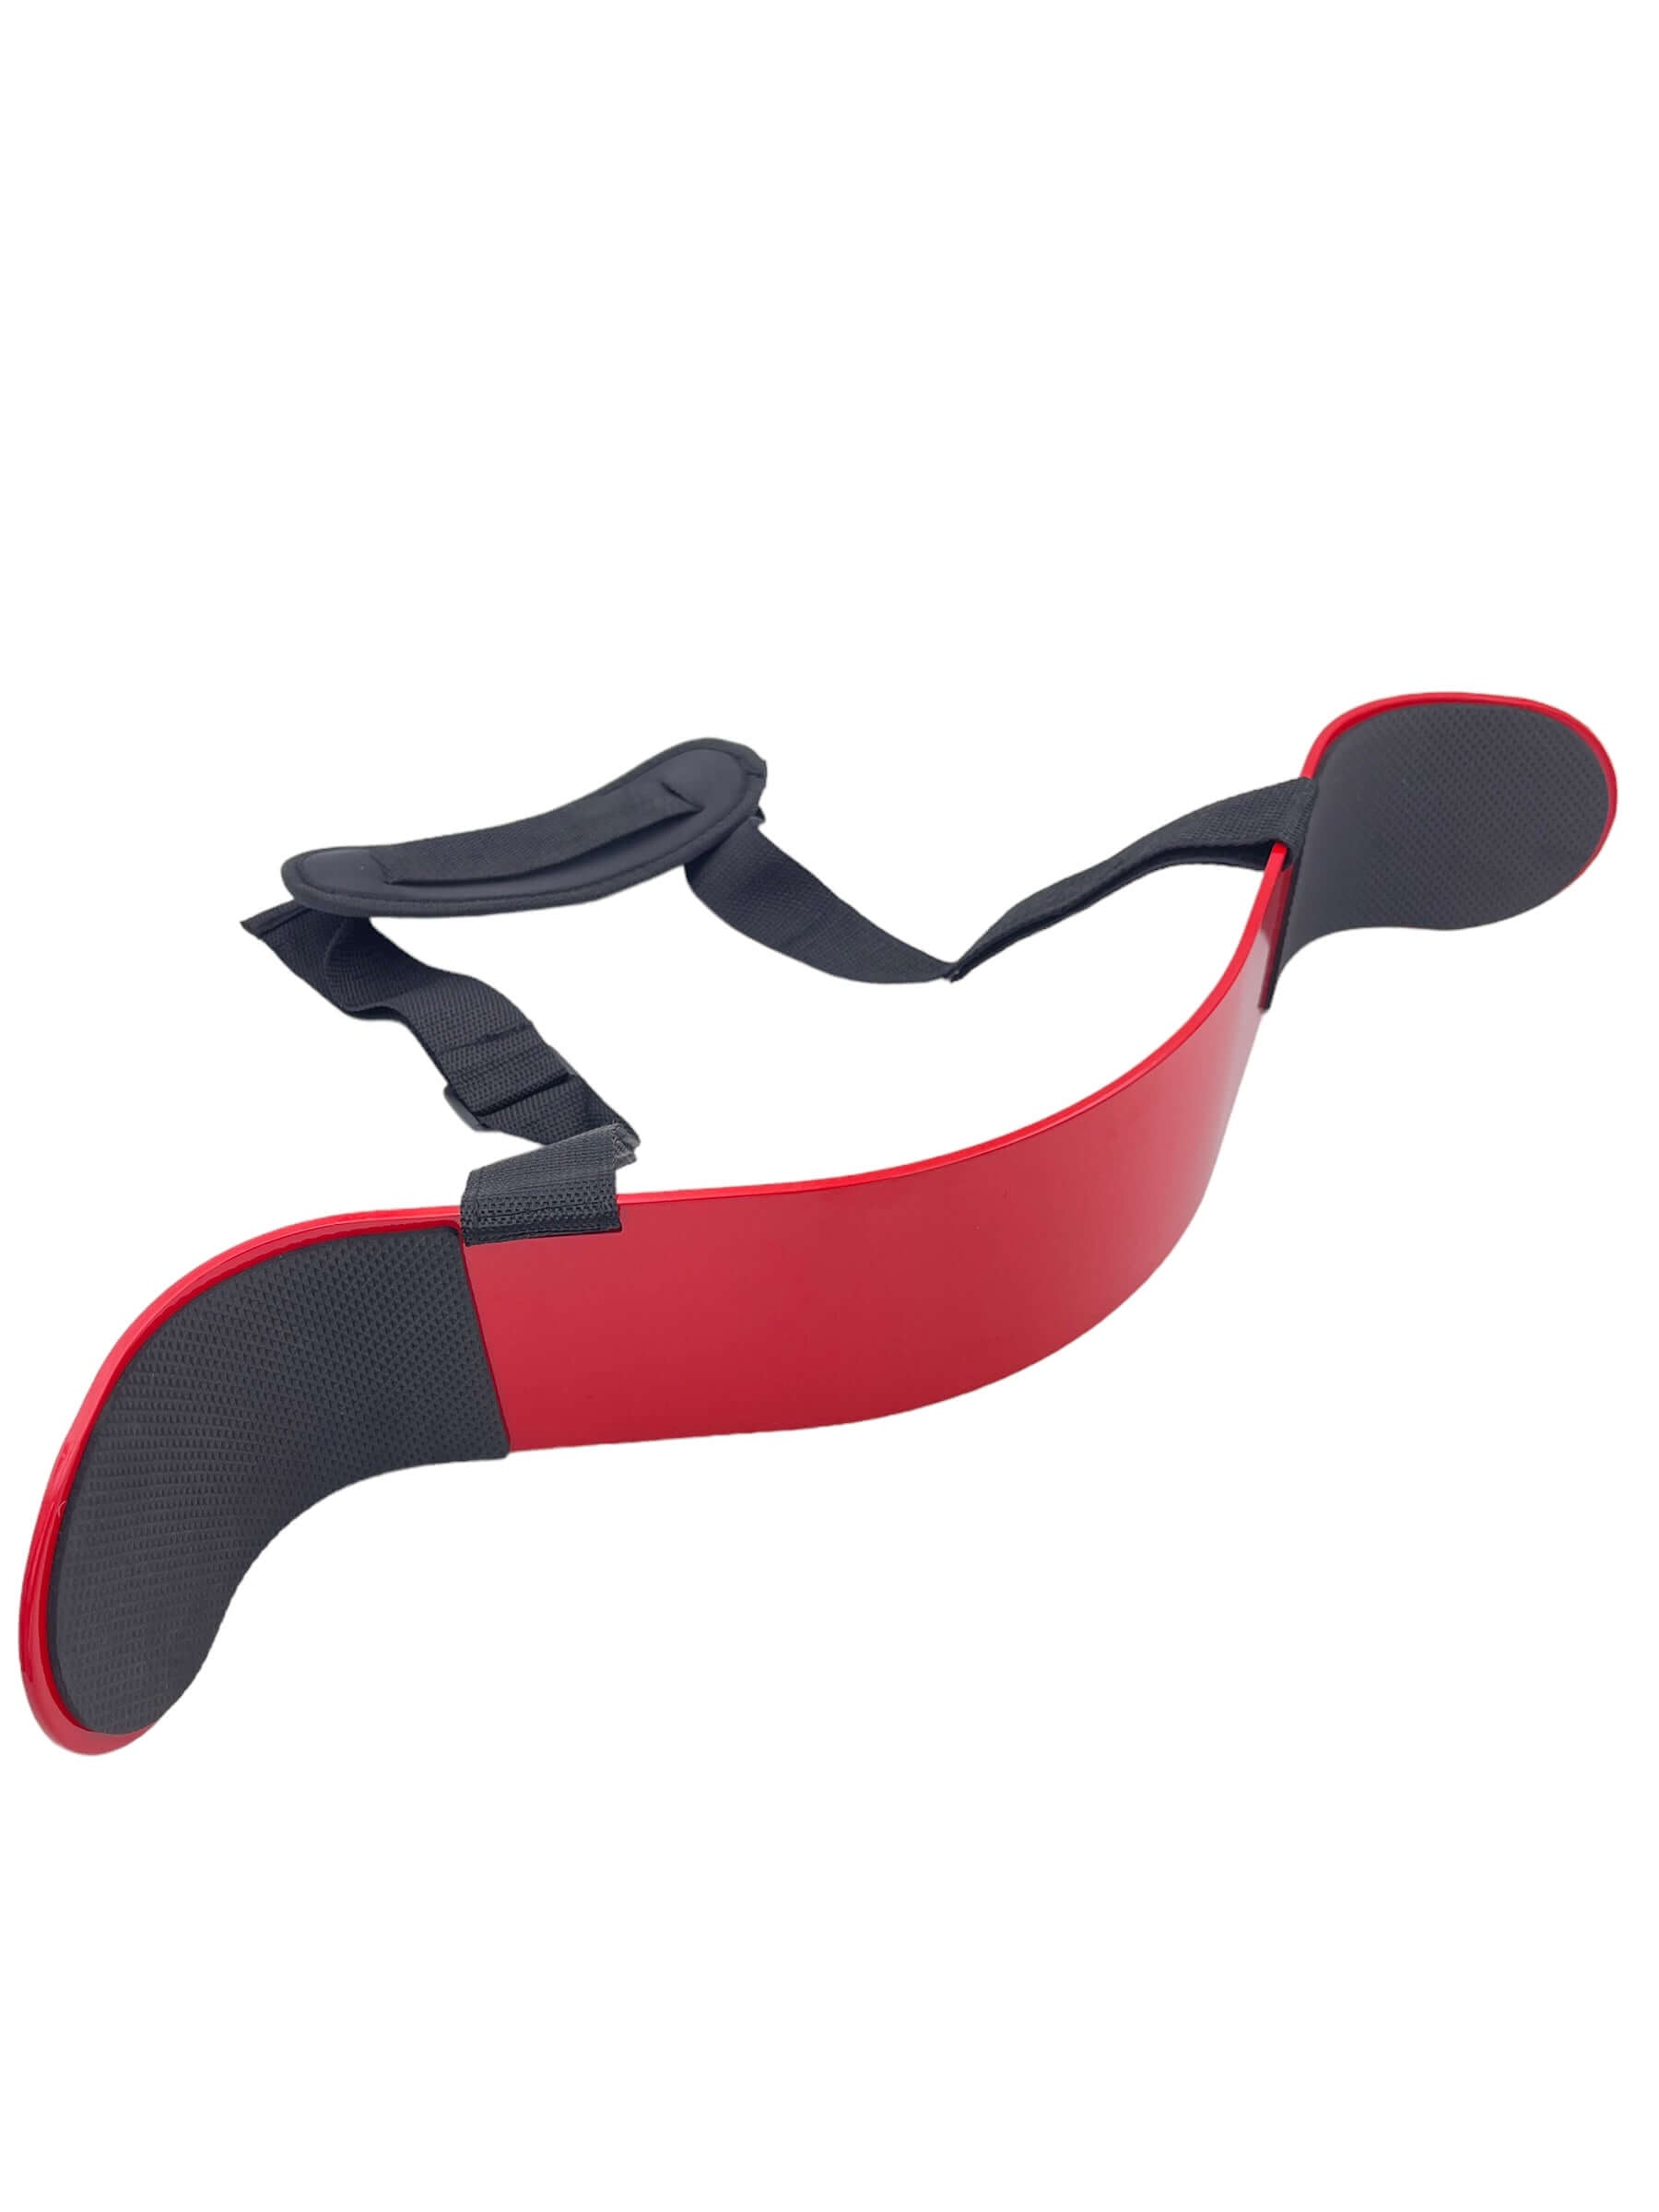 Arm Blaster Bicep EZ Training Tool - Red | INSOURCE